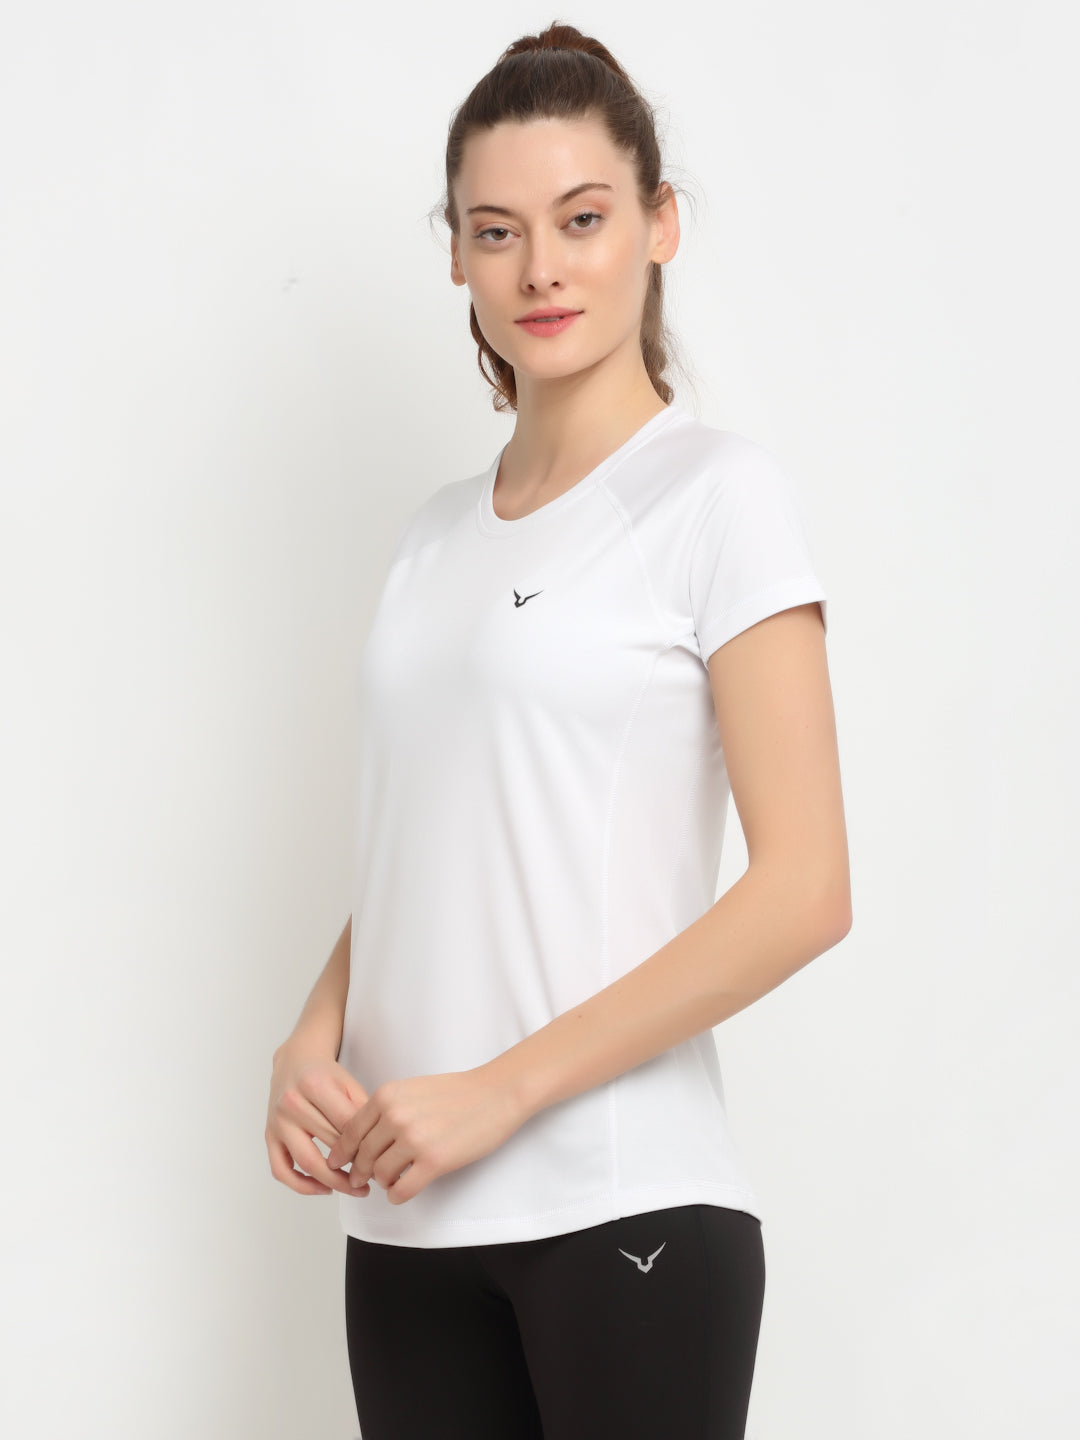 Invincible Women’s Gym Yoga Solid Tee